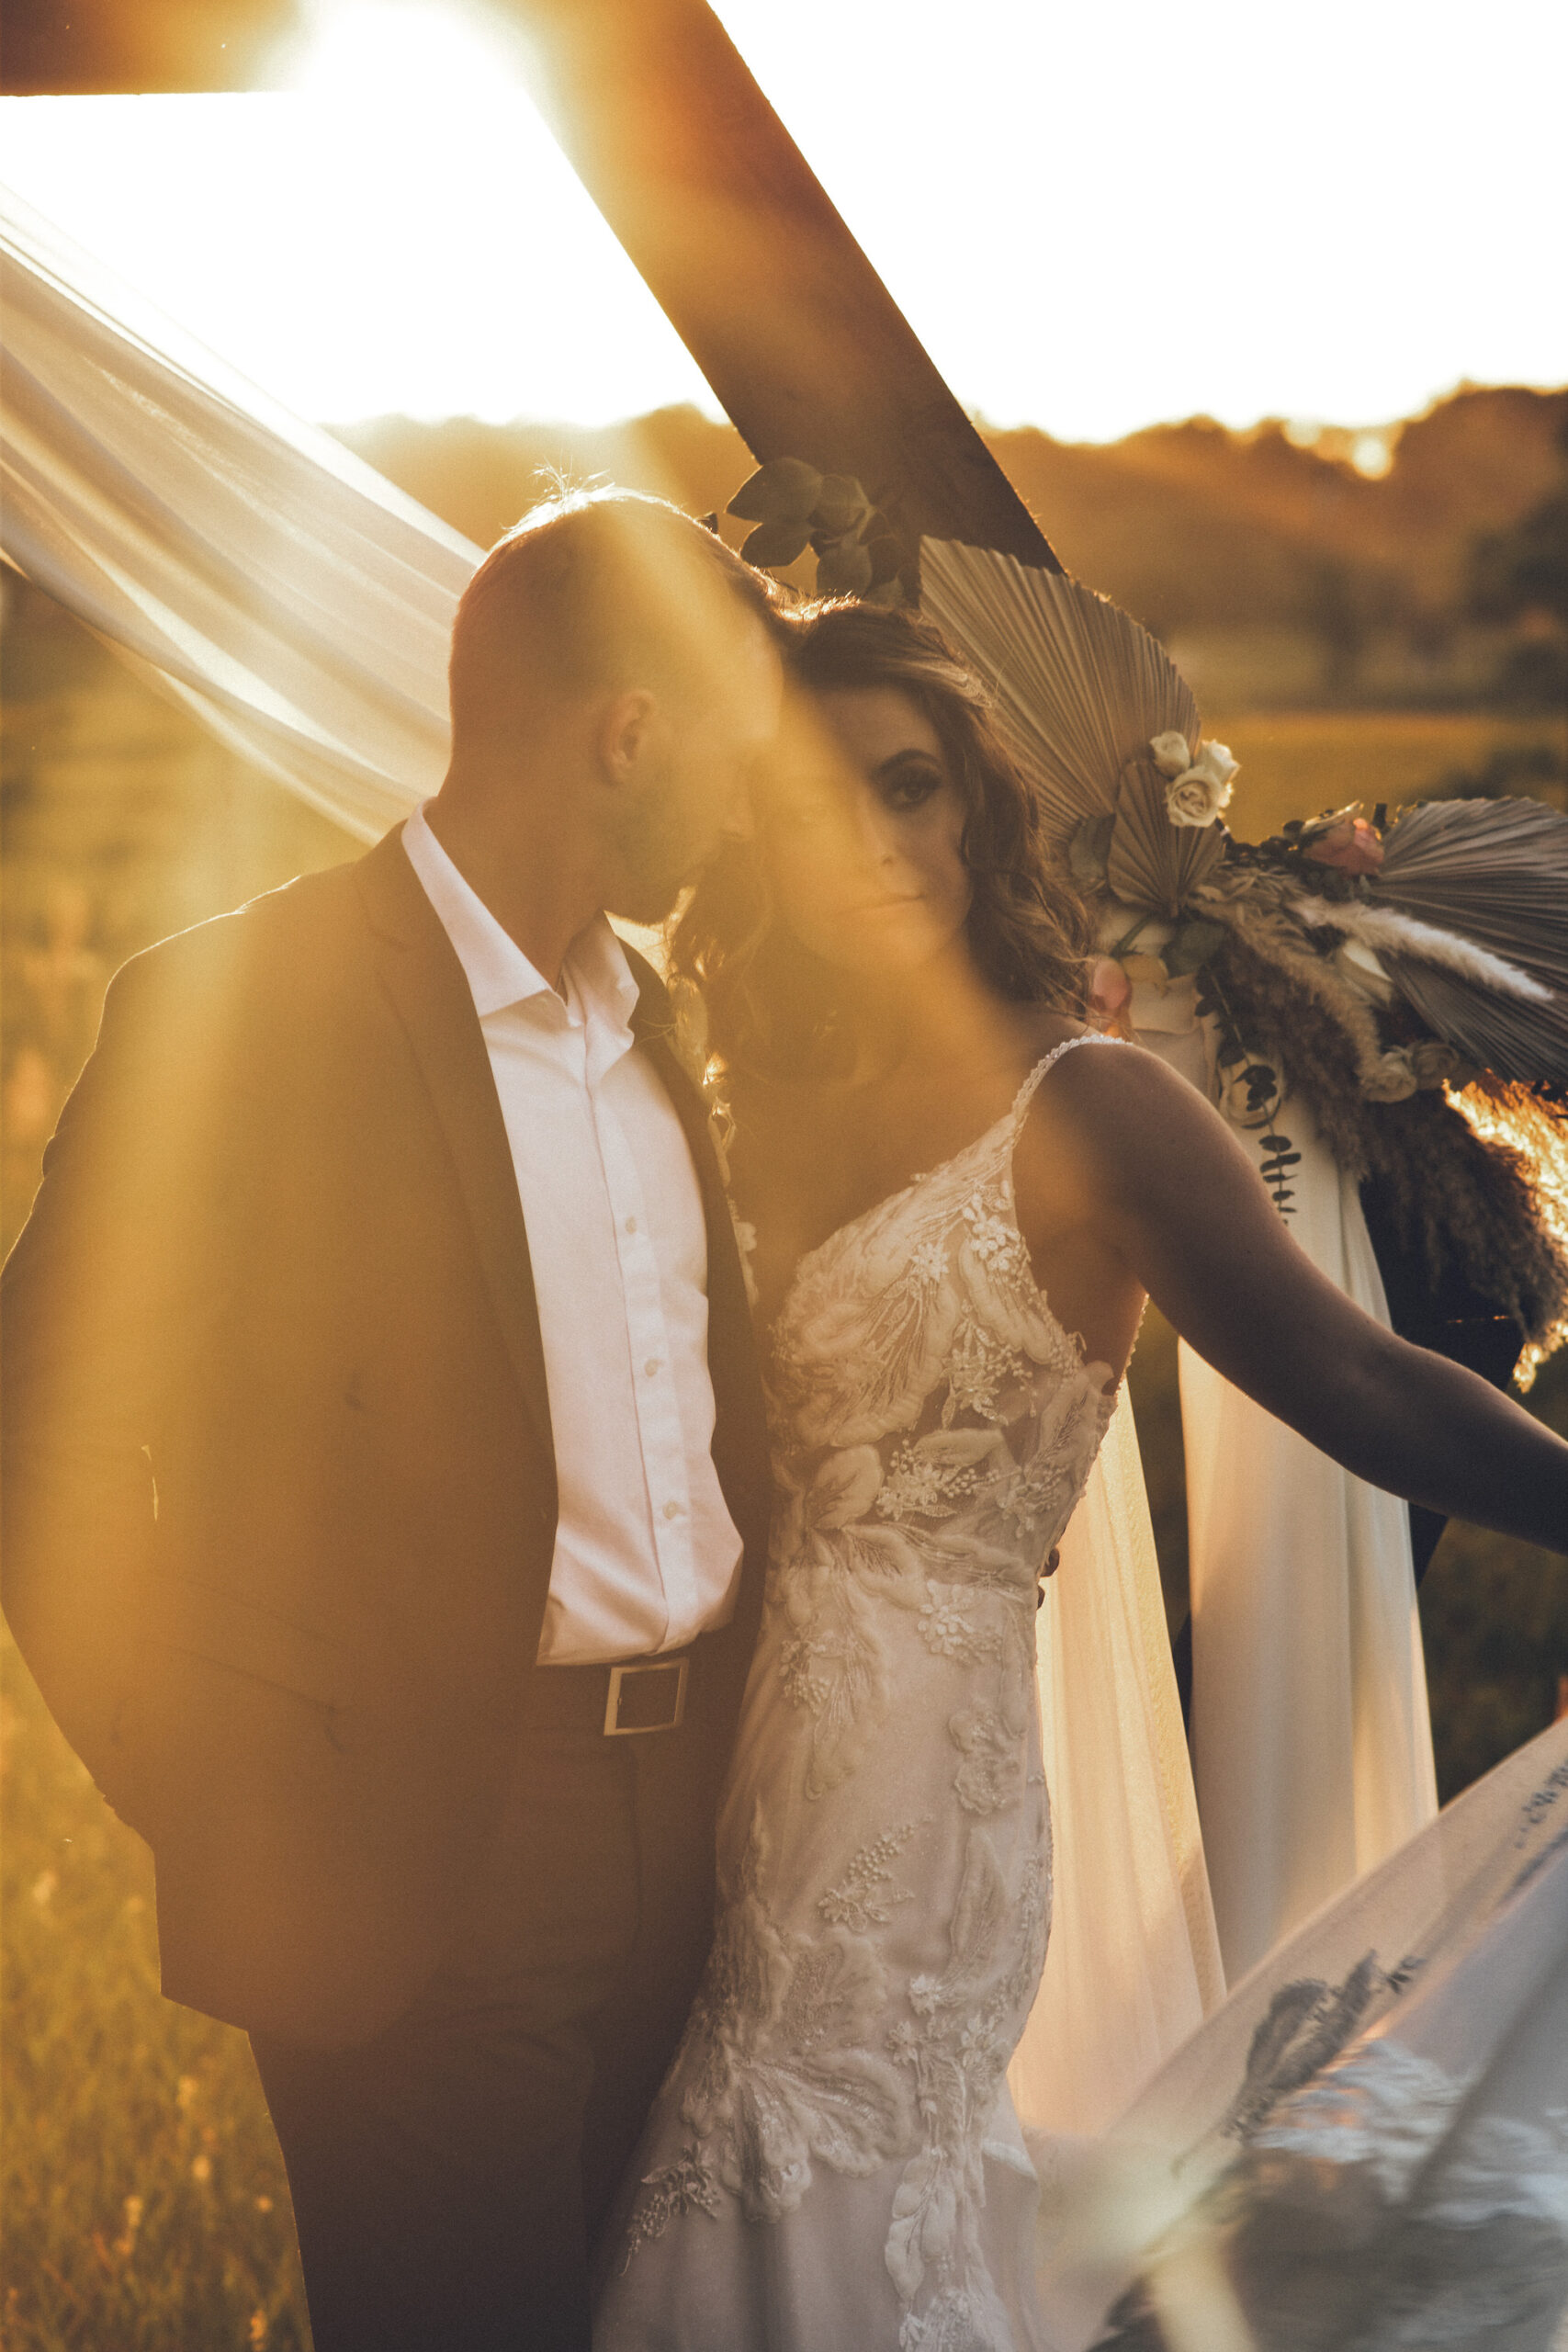 Sunset Wedding Portrait Bride and Groom at Golden Hour | Tampa Photographer The Gadabouts Captures